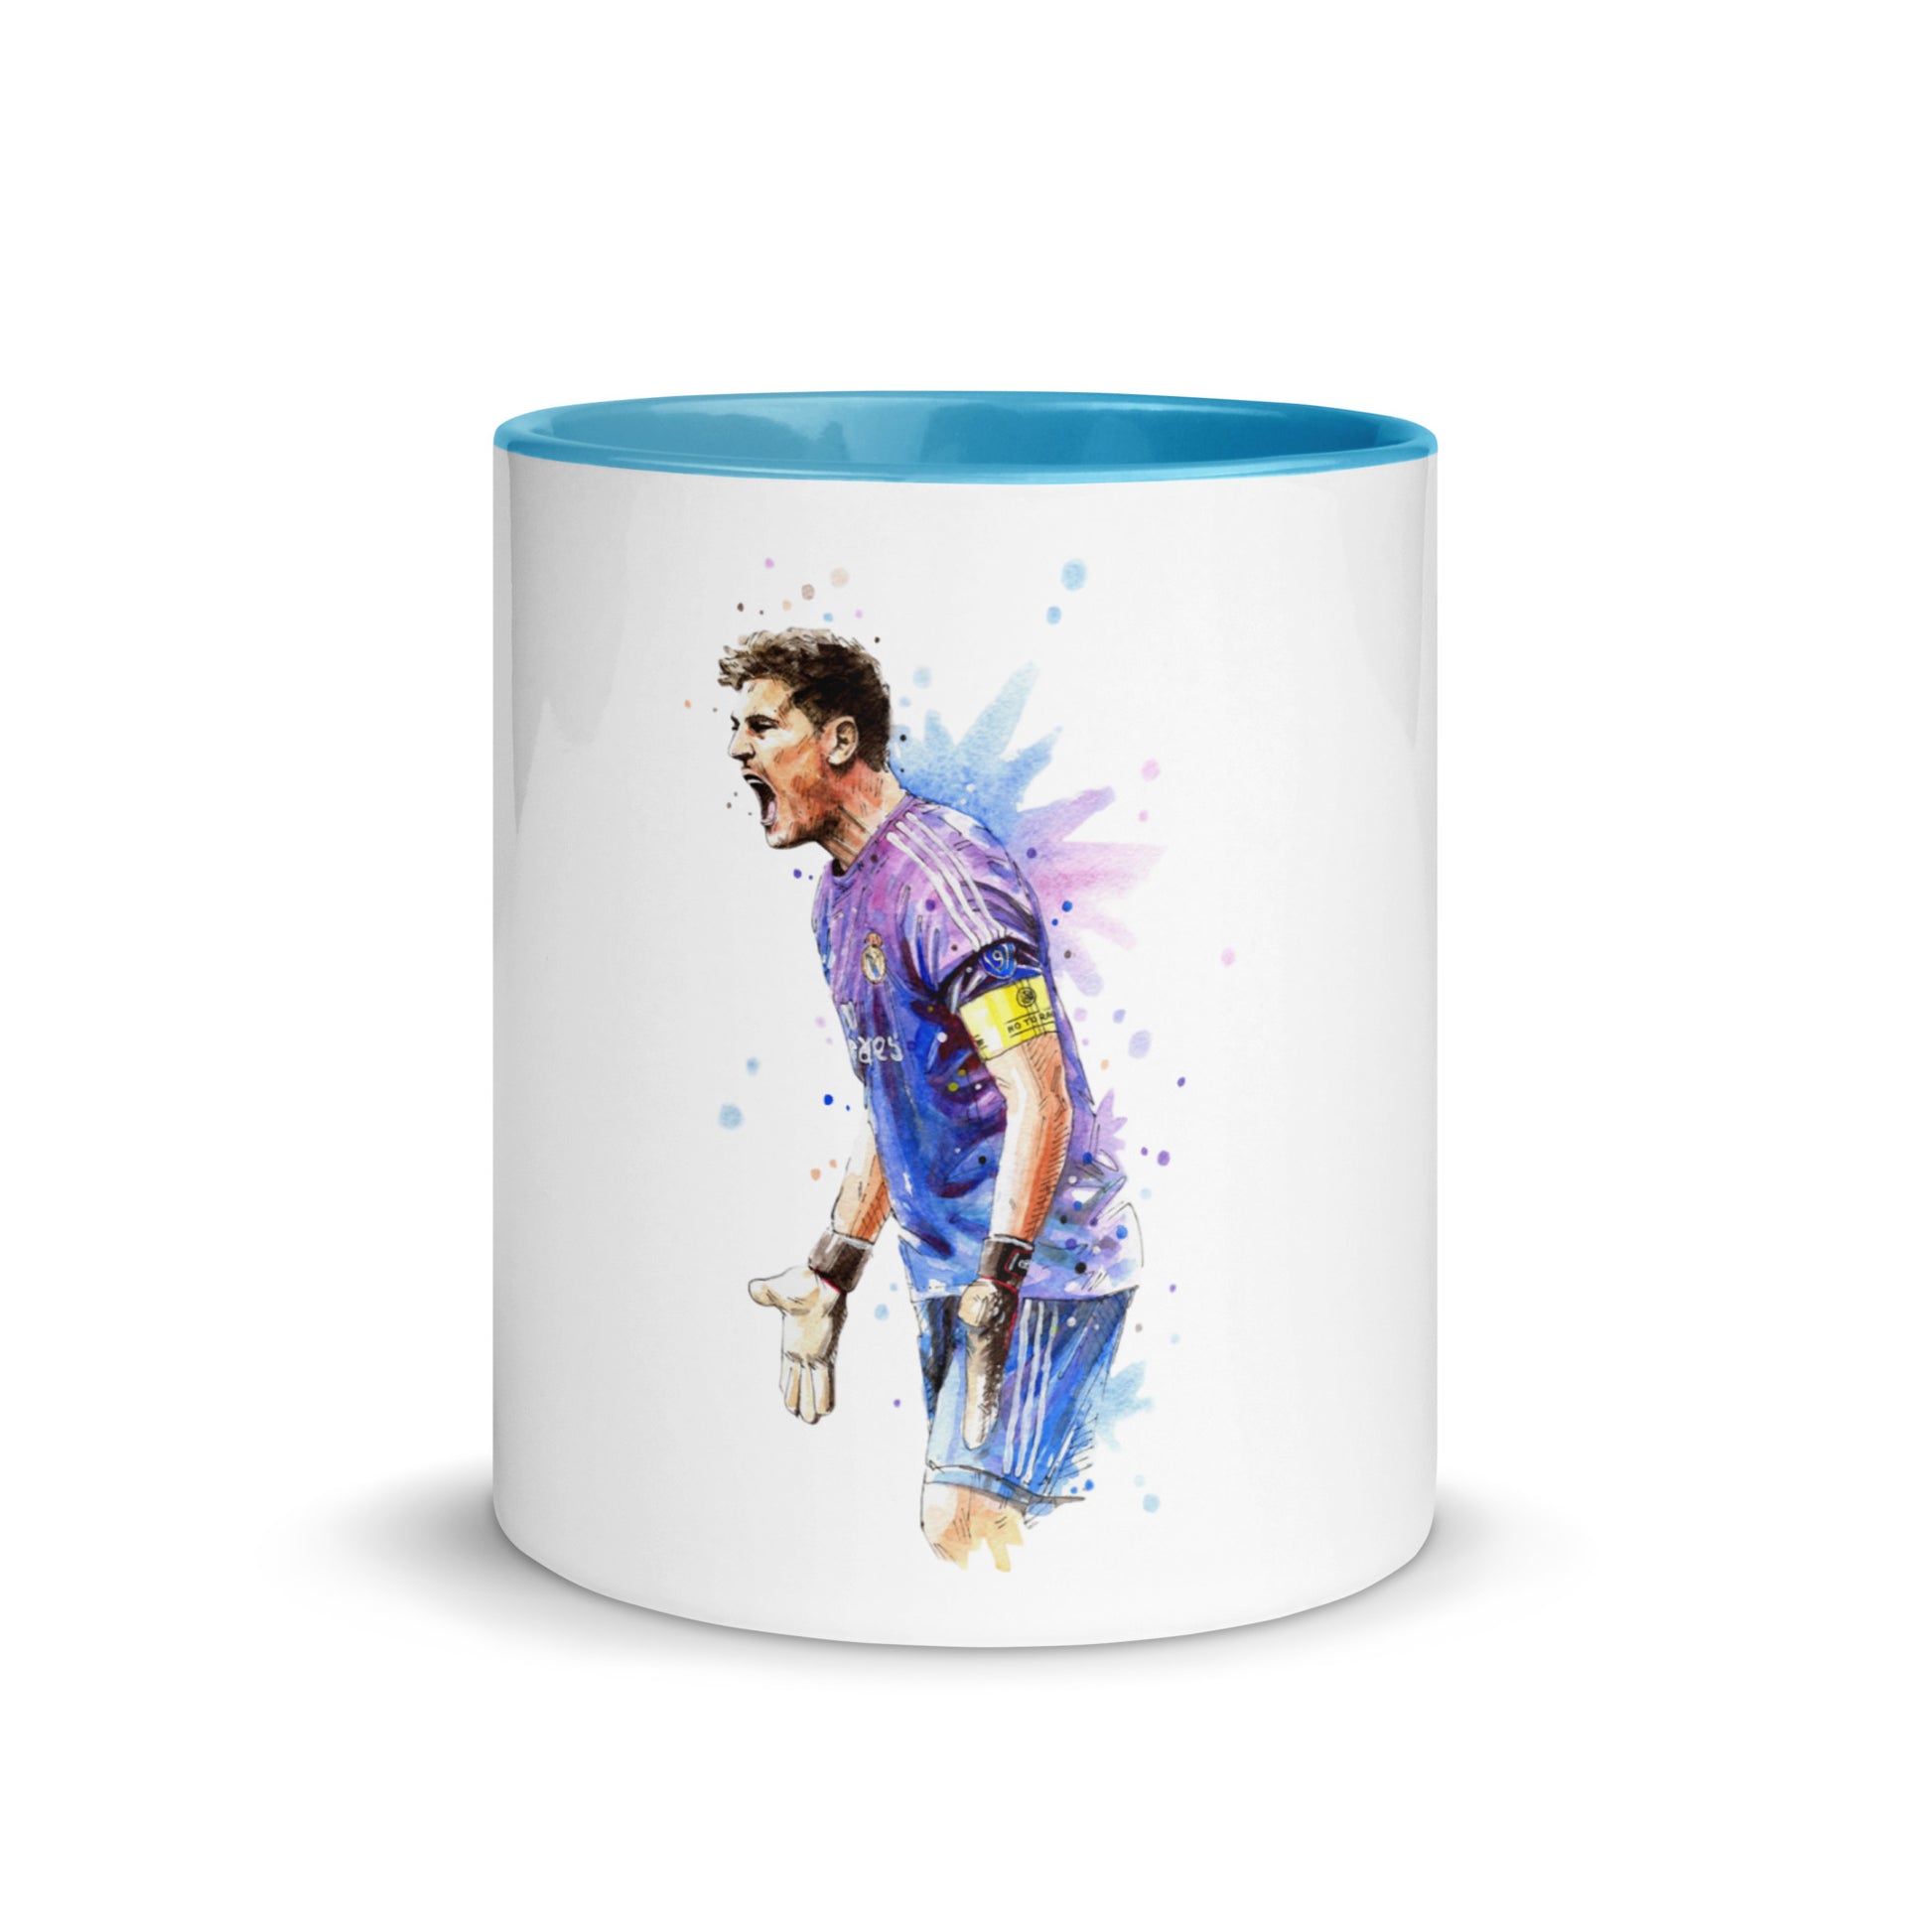 Real Madrid Legend Casillas Vintage Coffee  Mug with Color Inside - The 90+ Minute